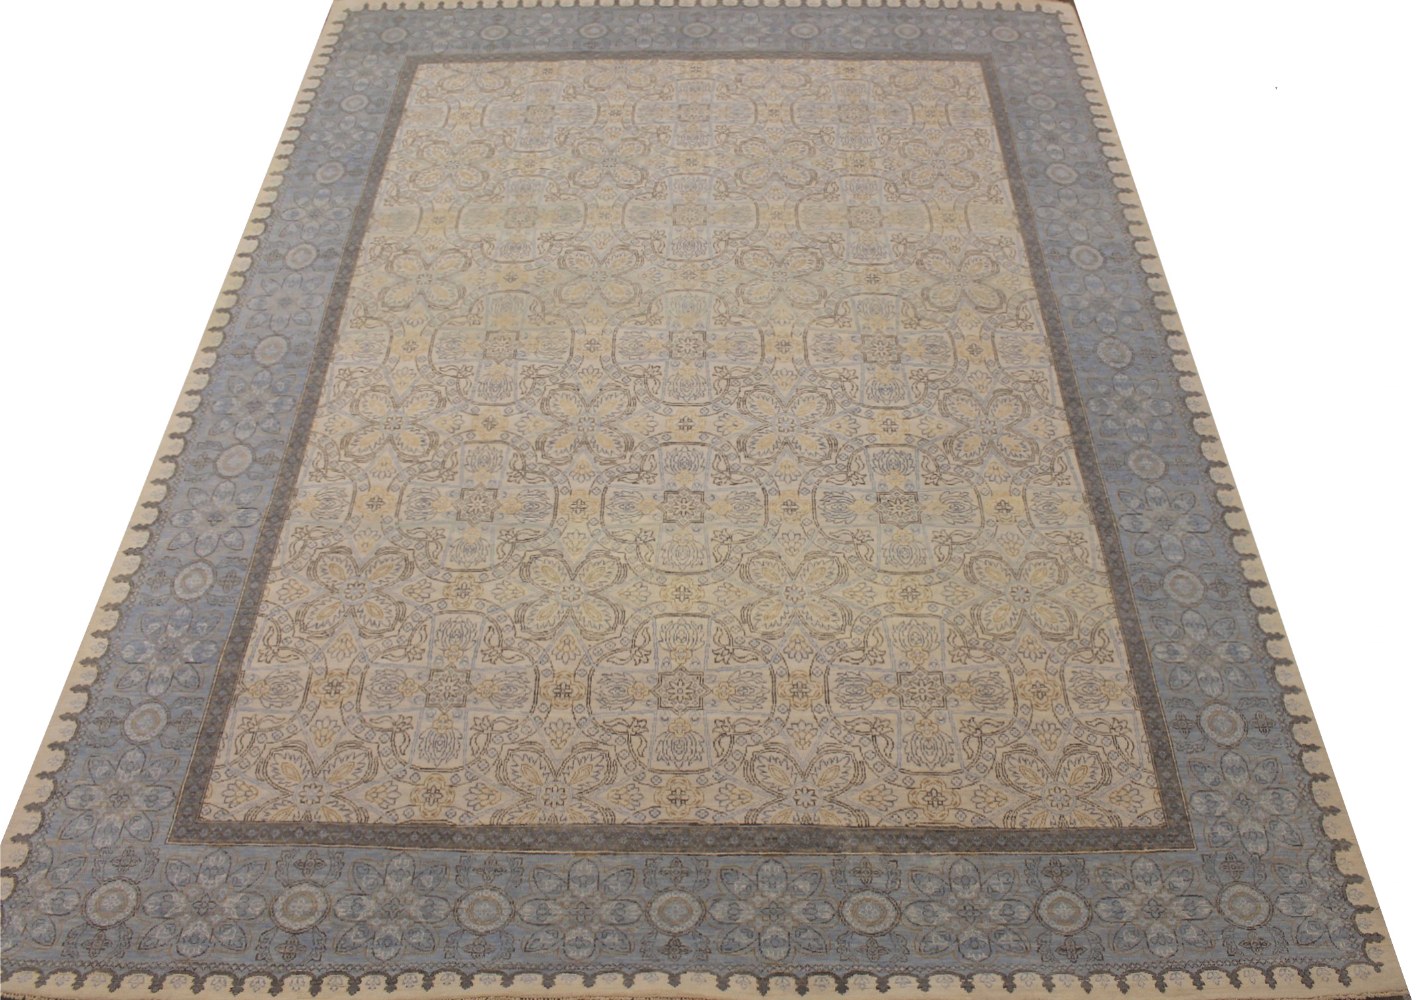 8x10 Aryana & Antique Revivals Hand Knotted Wool Area Rug - MR027451